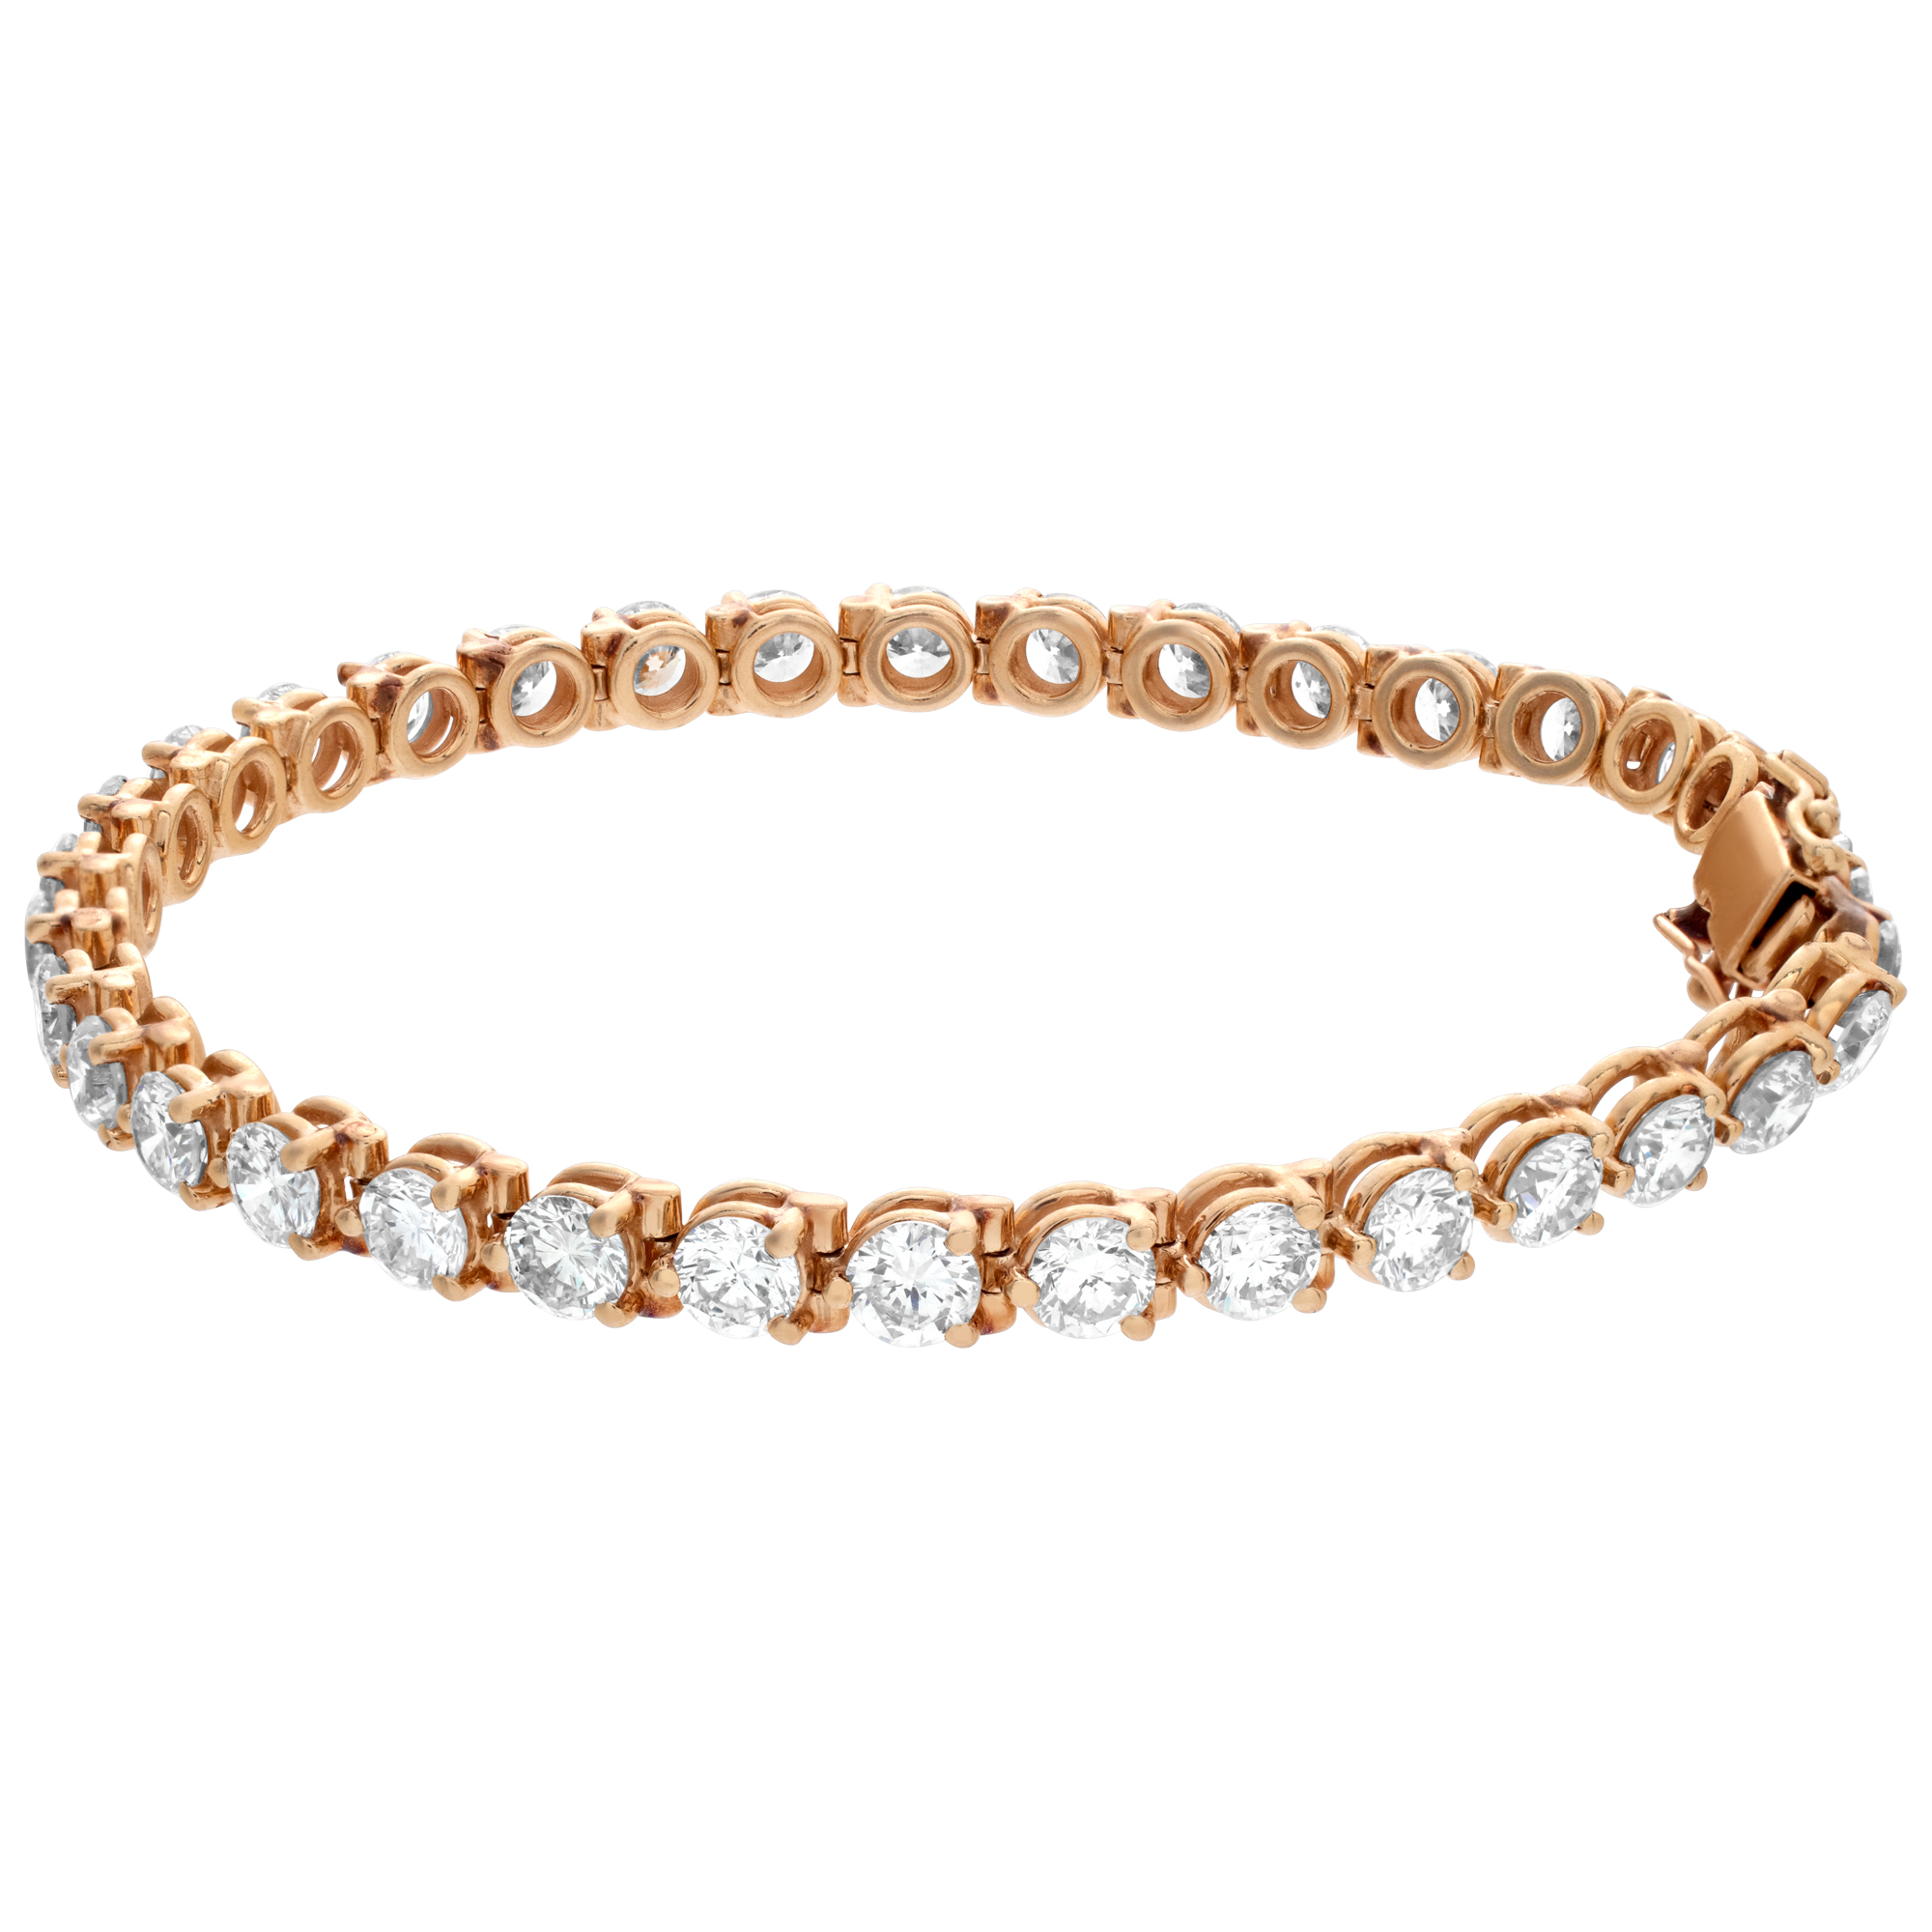 Diamond line bracelet in 14k yellow gold with approximately 10 carats in diamonds I-J Color, SI-I Clarity.